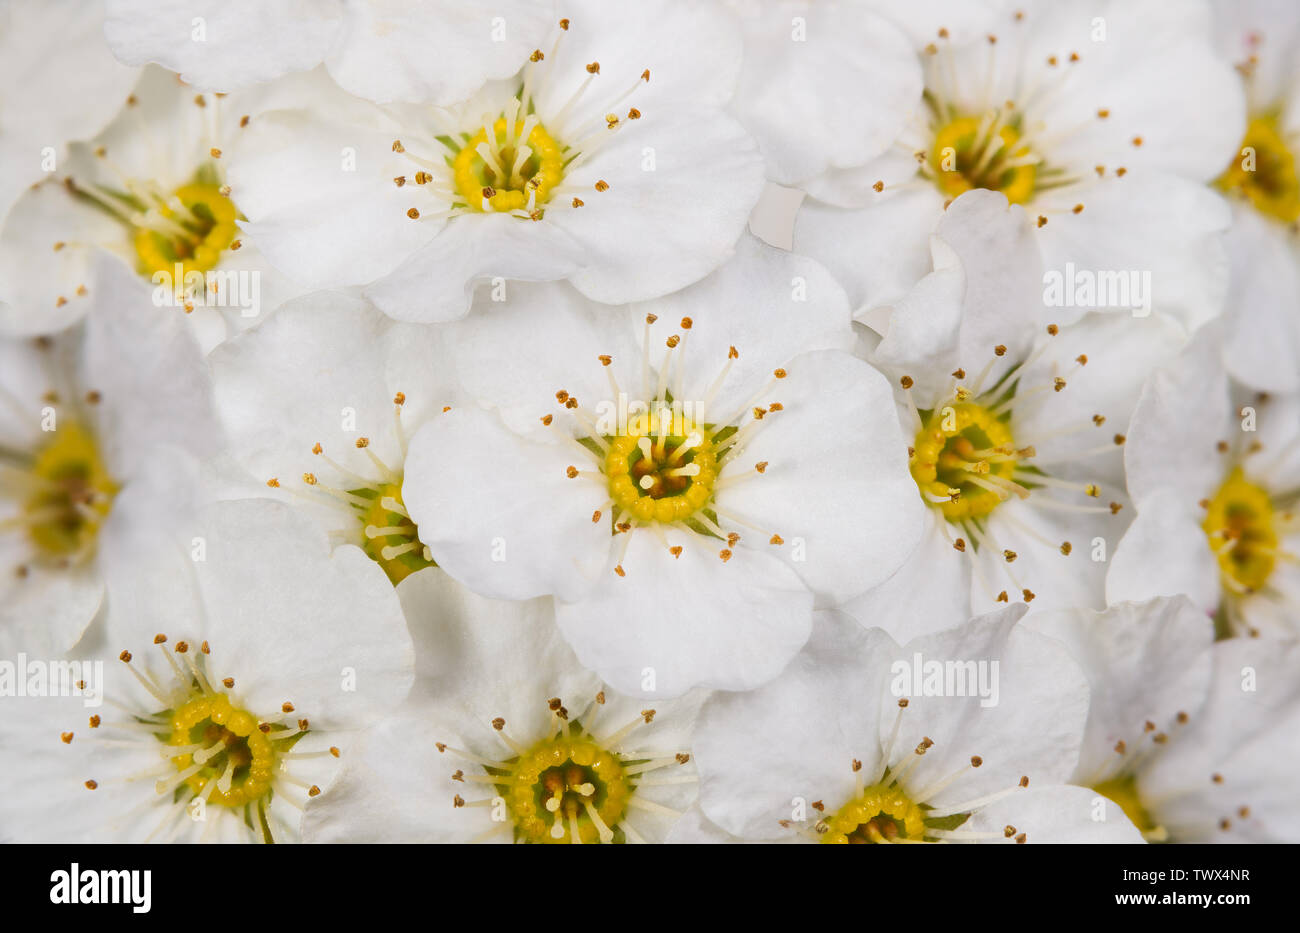 Delicate floral texture. Vanhoutte spirea flowers in detail. Spiraea vanhouttei. Romantic background. Snowy white blooms, yellow centers, long stamens. Stock Photo